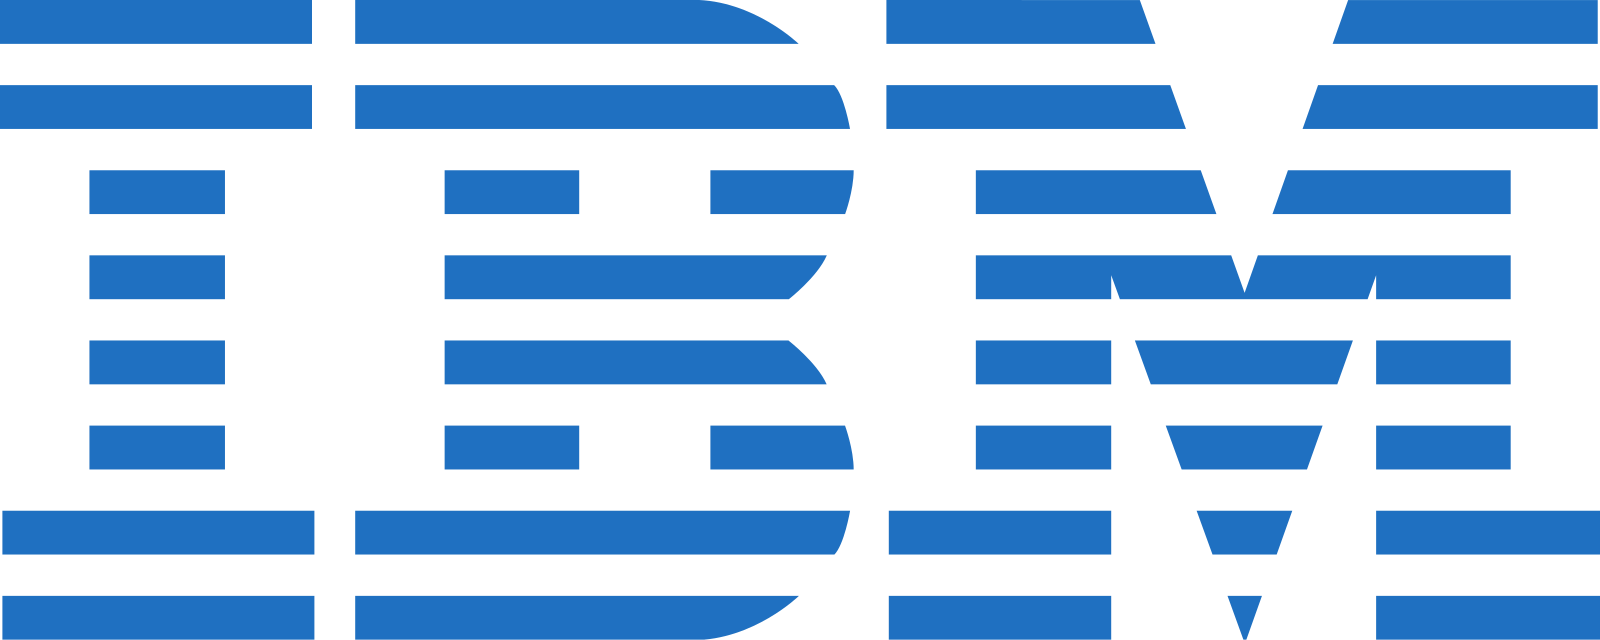  IBM Establishes First Quantum Education and Research Initiative for Historically Black Colleges and Universities